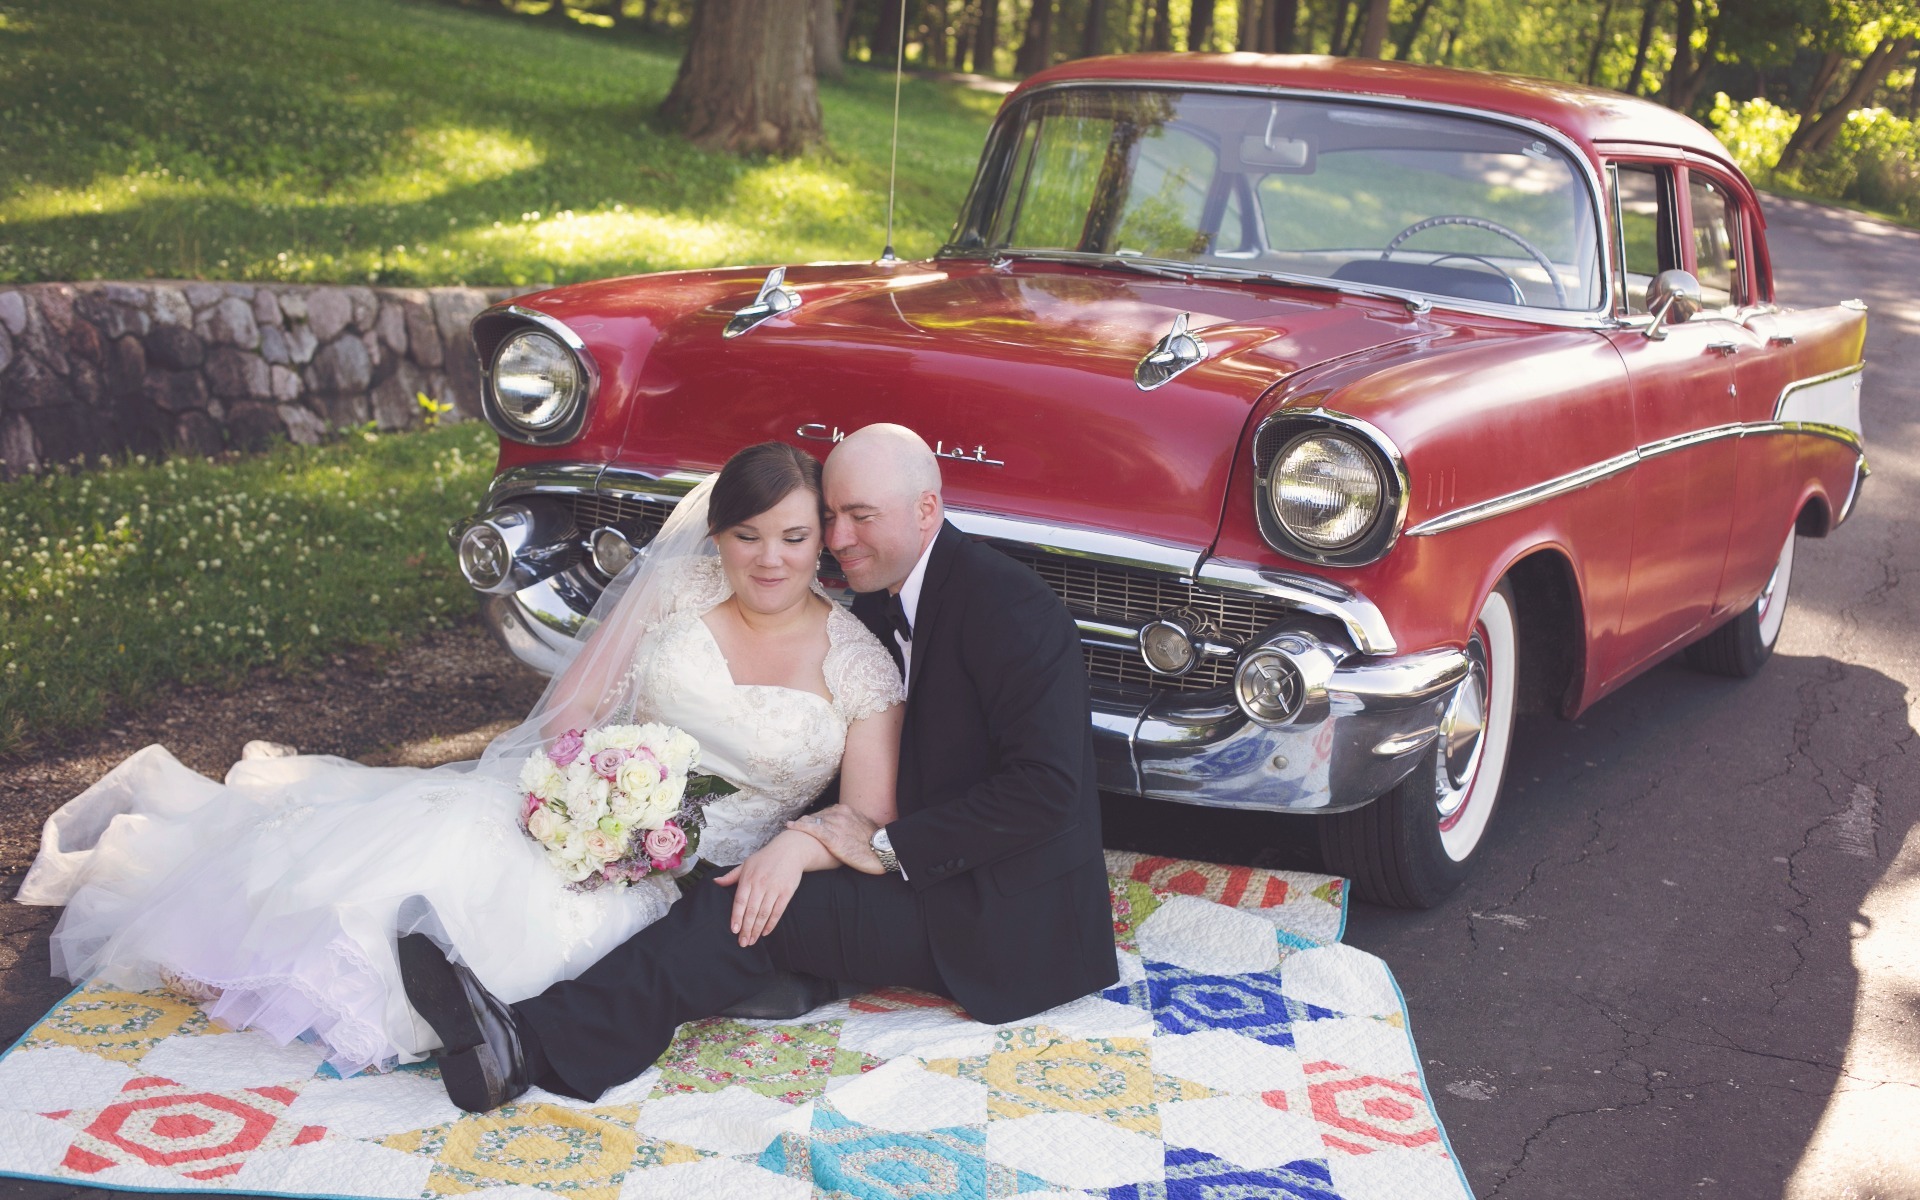 bride & groom snuggle on a blanket in front of a classic red chevrolet